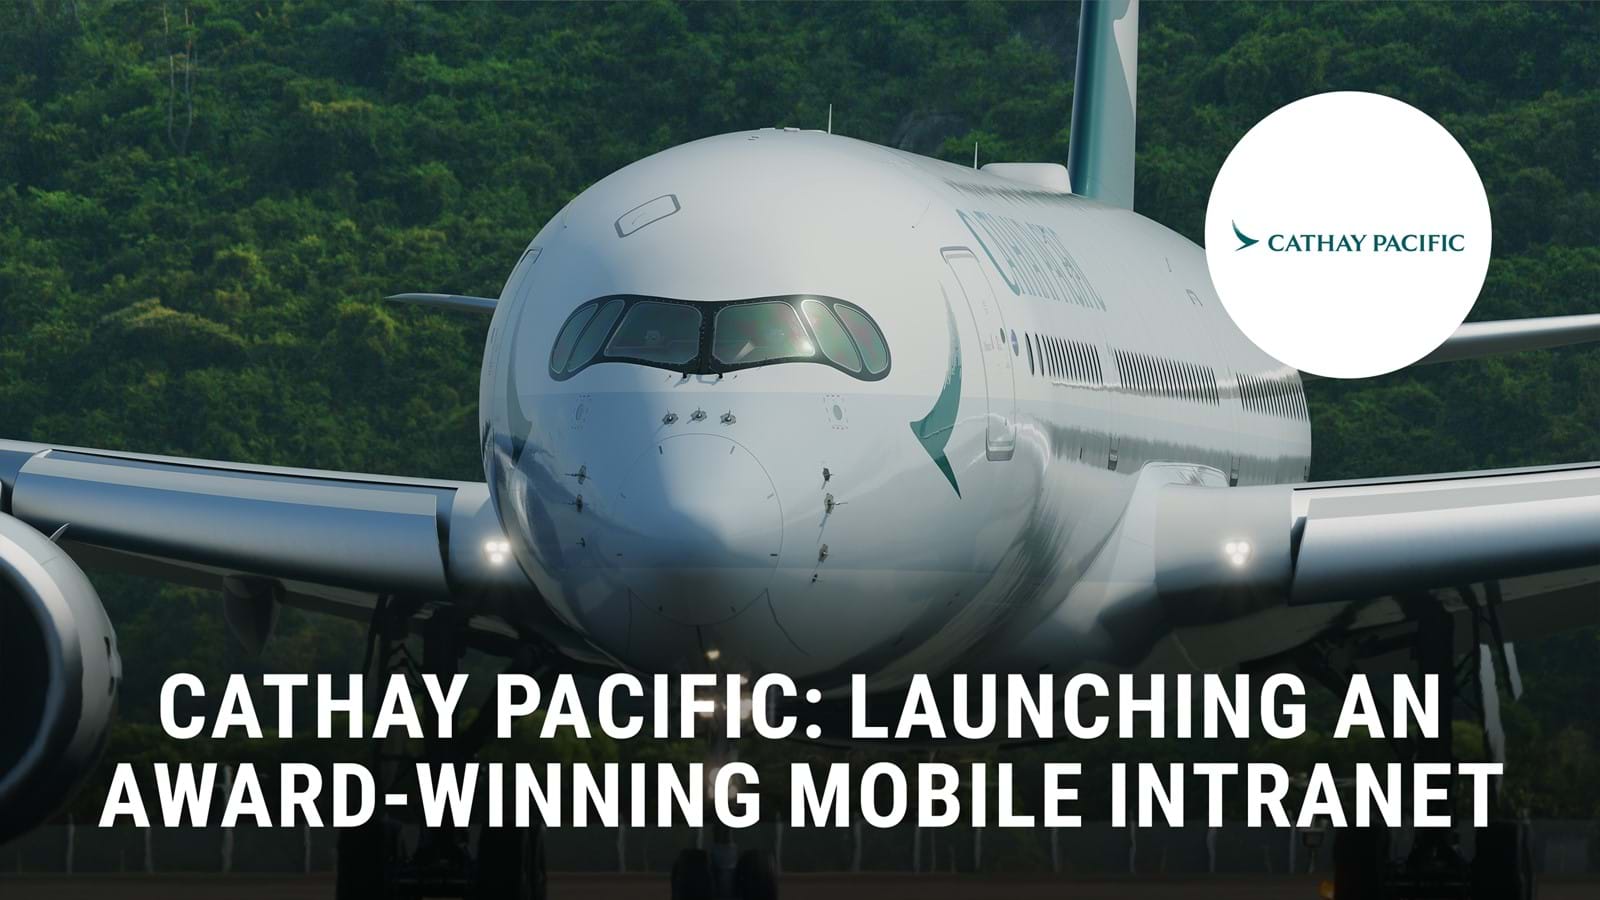 'Cathay Pacific launch an award-winning mobile intranet' case study front cover